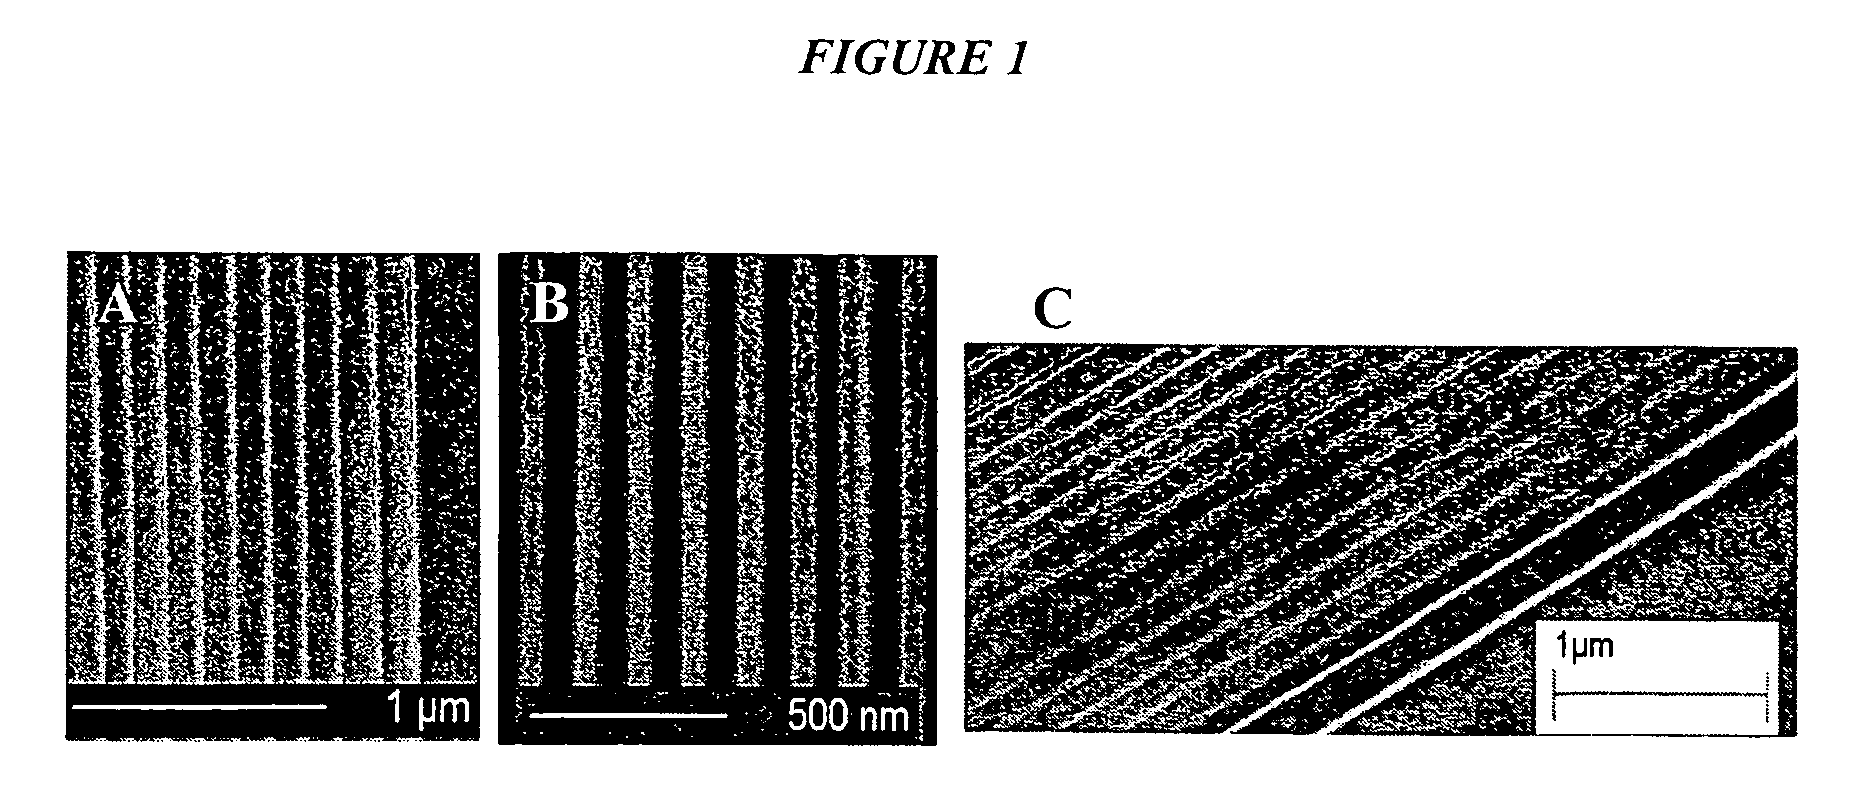 Methods for fabricating nano and microparticles for drug delivery